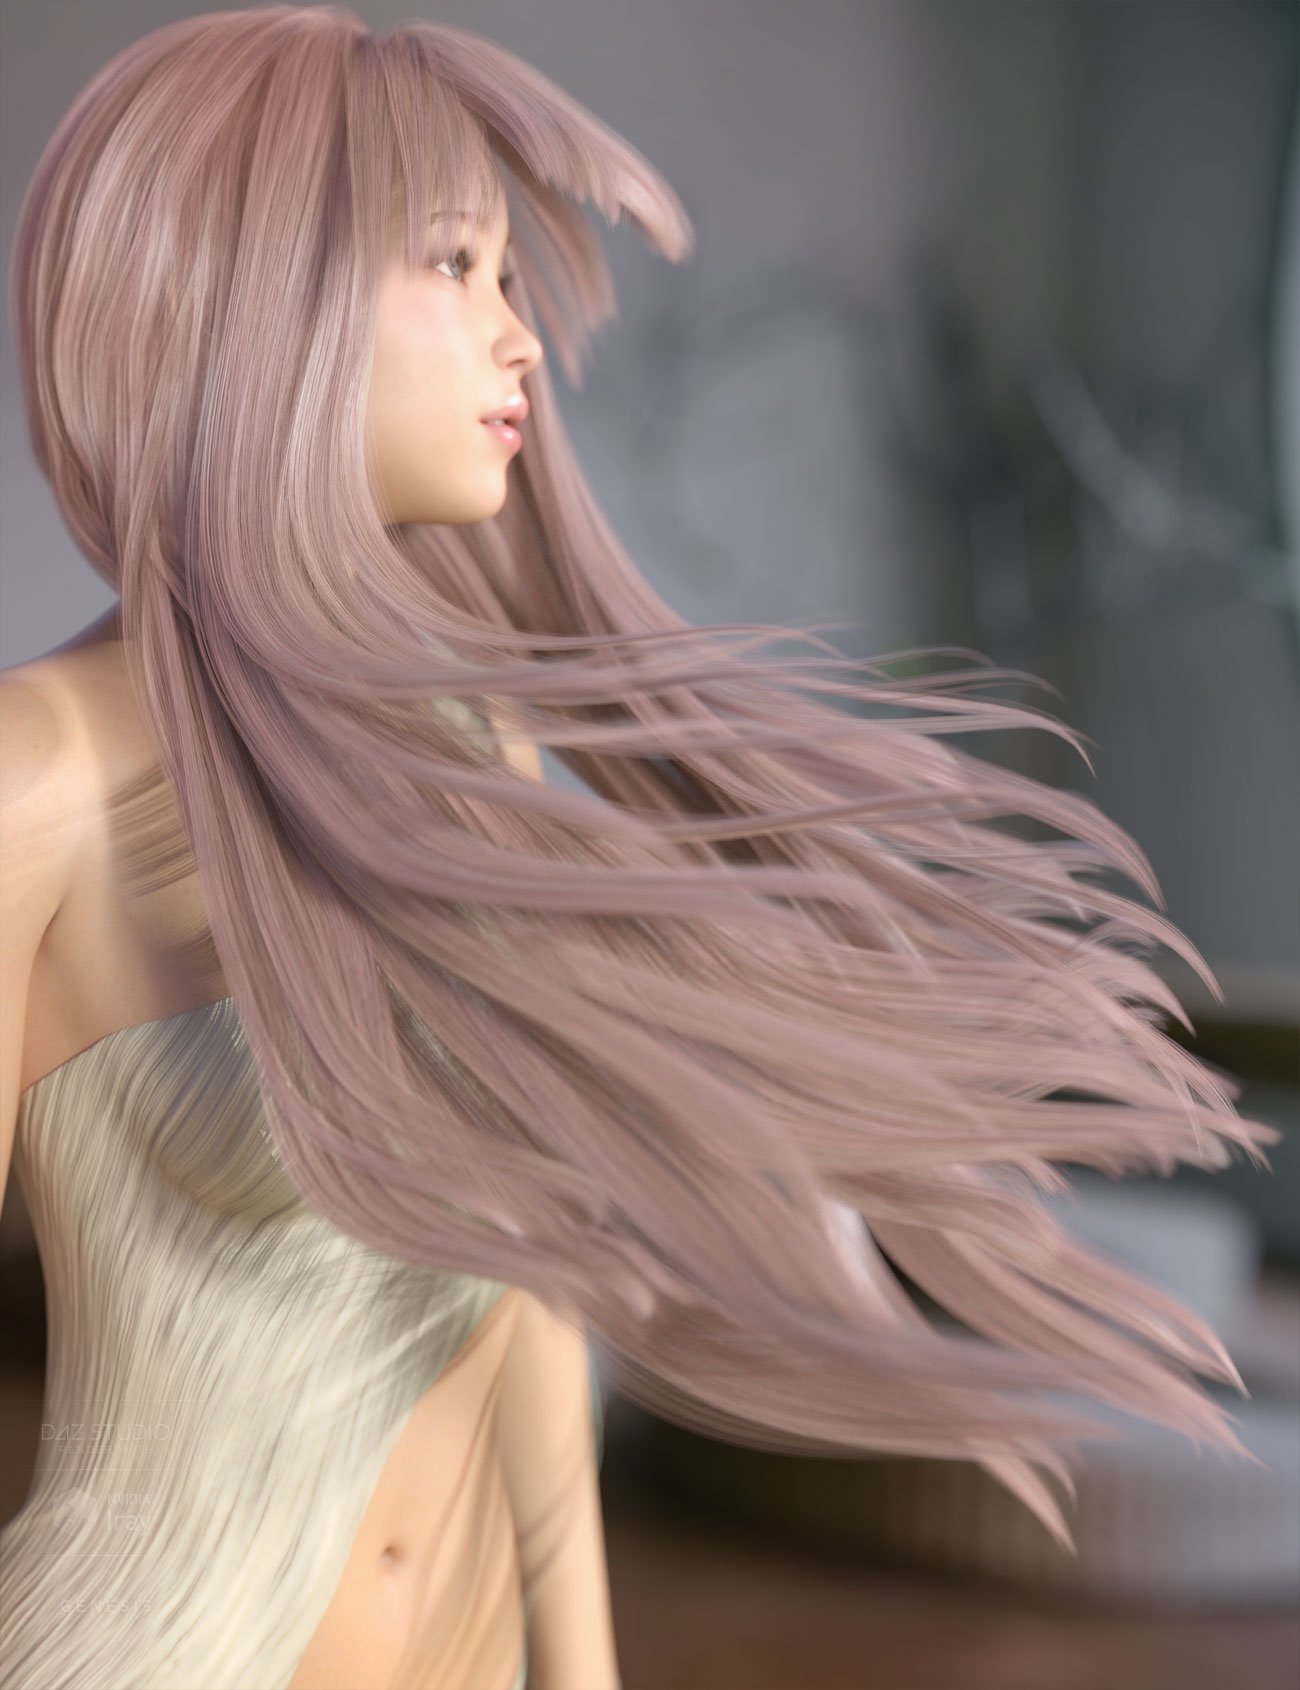 Neve Hair for Genesis 3 and 8 Females by: AprilYSH, 3D Models by Daz 3D